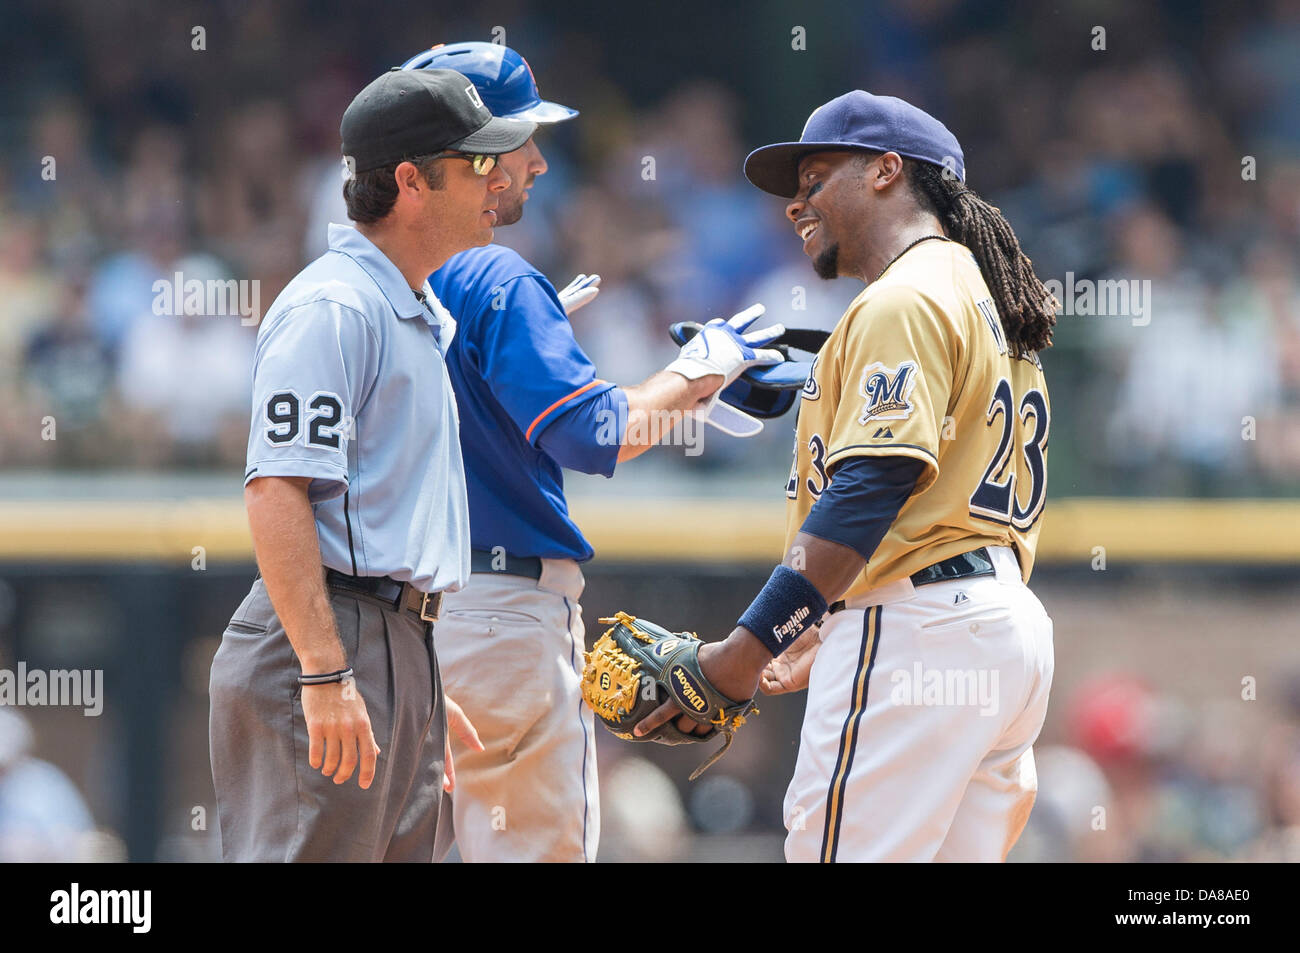 July 7, 2013 - Milwaukee, Wisconsin, United States of America - July 7, 2013: Milwaukee Brewers second baseman Rickie Weeks #23 discusses the call with umpire John Hirschbeck during the Major League Baseball game between the Milwaukee Brewers and the New York Mets at Miller Park in Milwaukee, WI. Mets lead the Brewers 2-1 in the 8th inning. John Fisher/CSM. Stock Photo